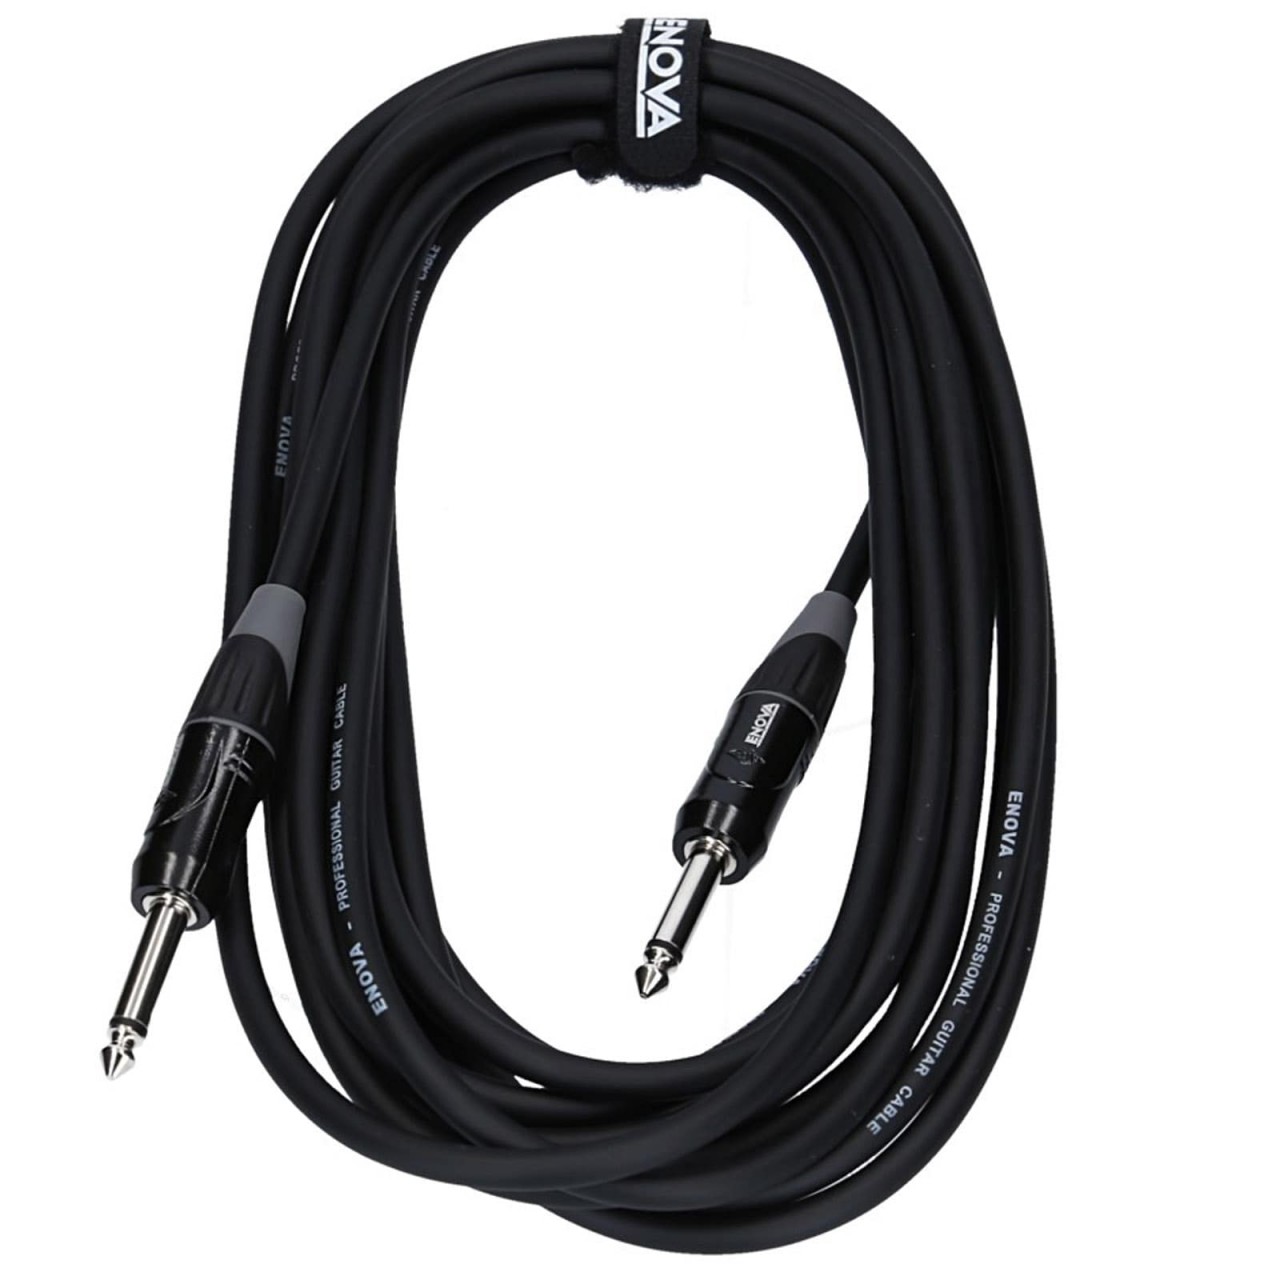 short 0.2 m guitar cable for pedalboards